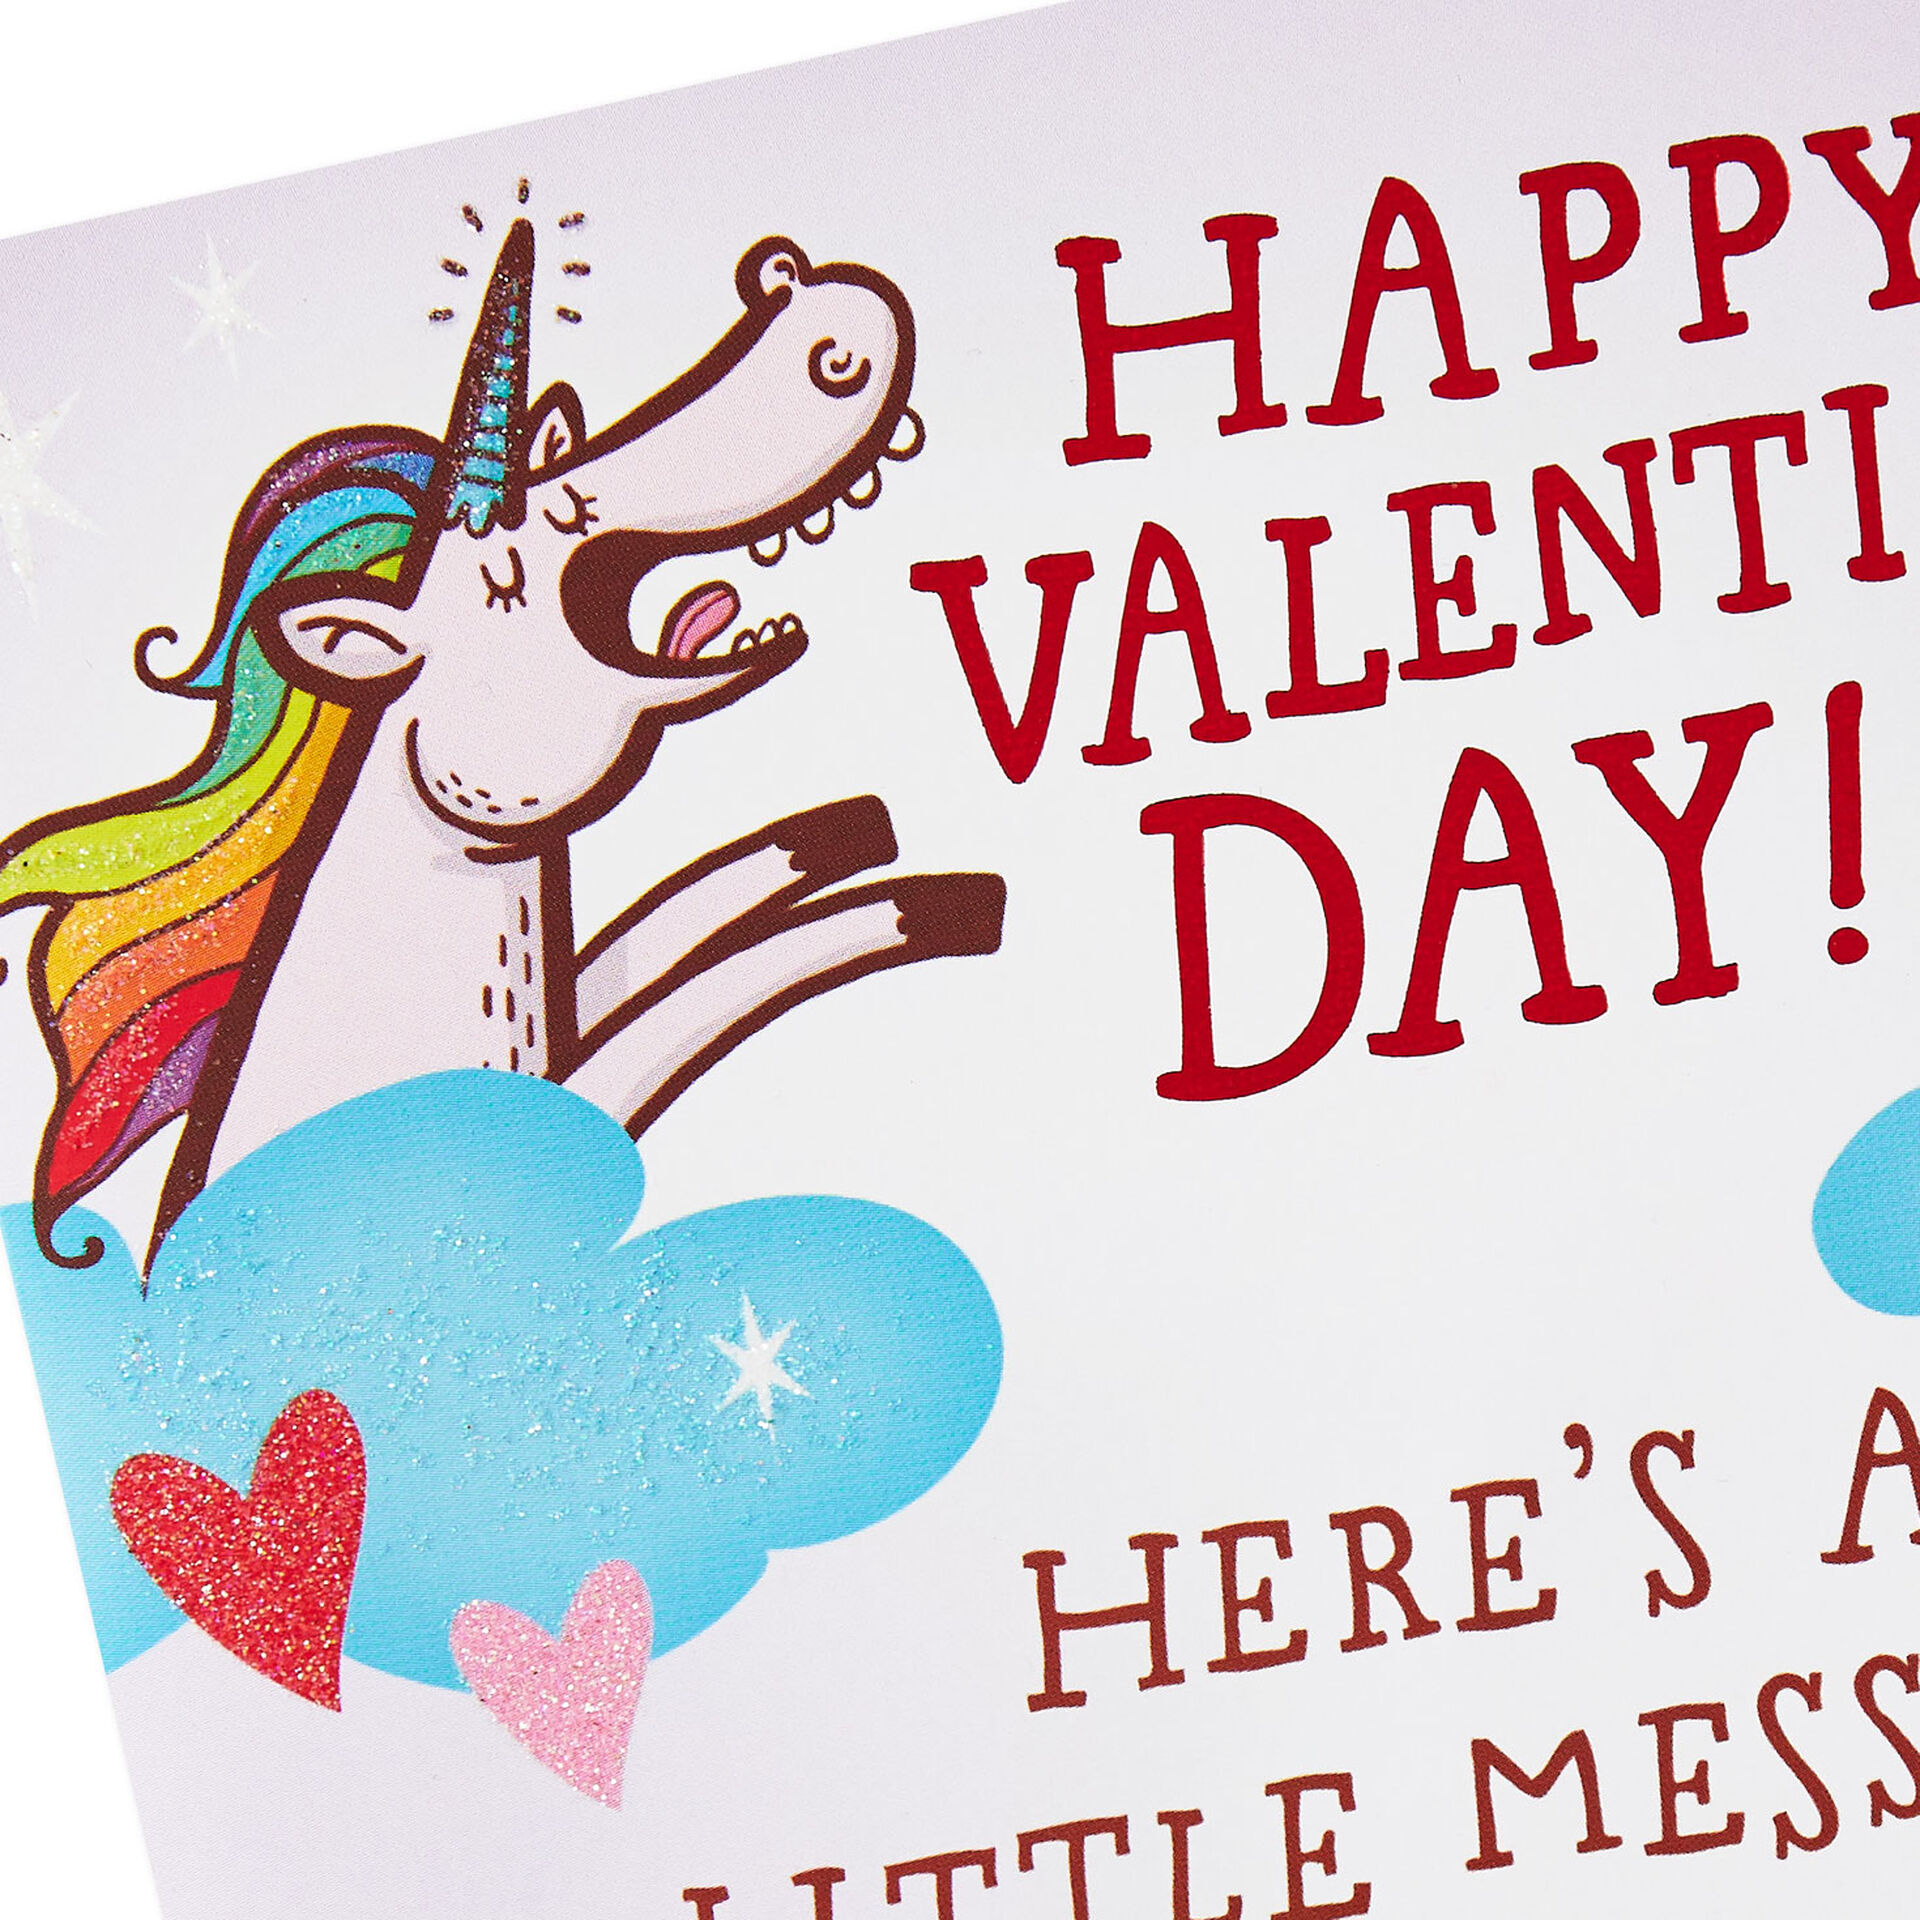 Sparkling Unicorn Fart Funny Valentines Day Card With Sound Greeting